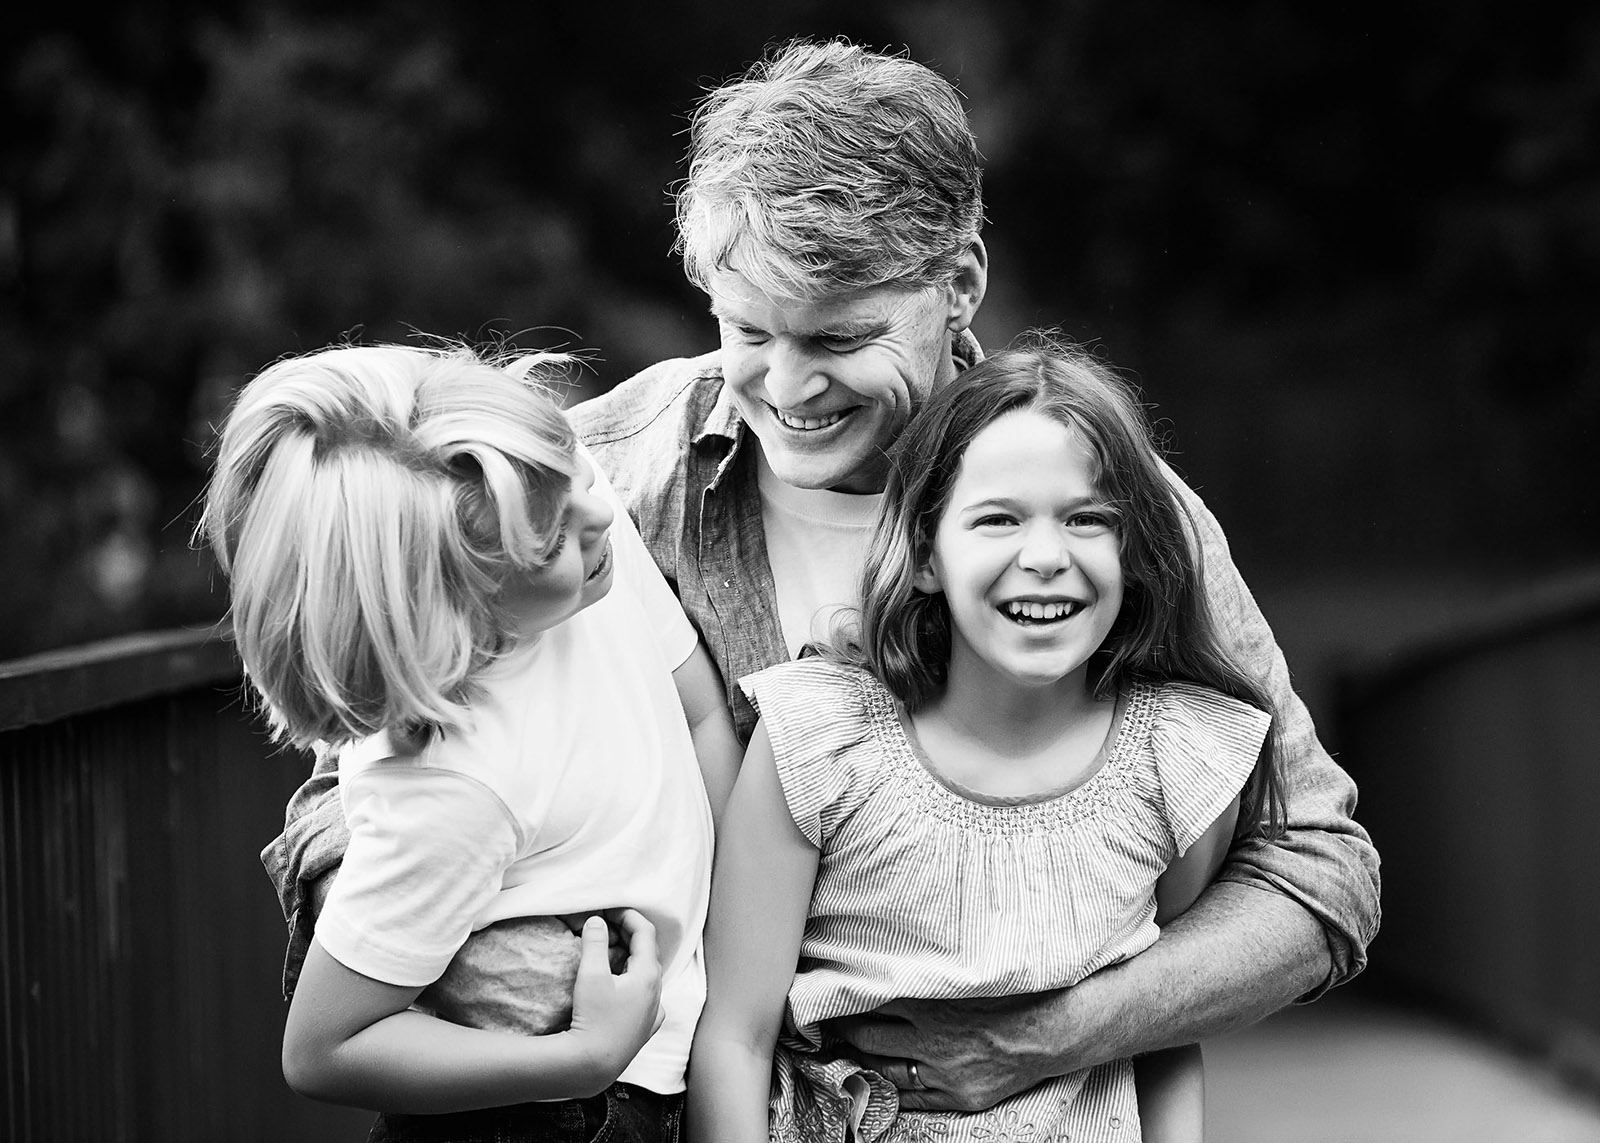 dad holding kids smiling and laughing games for happy family photos by leslie crane